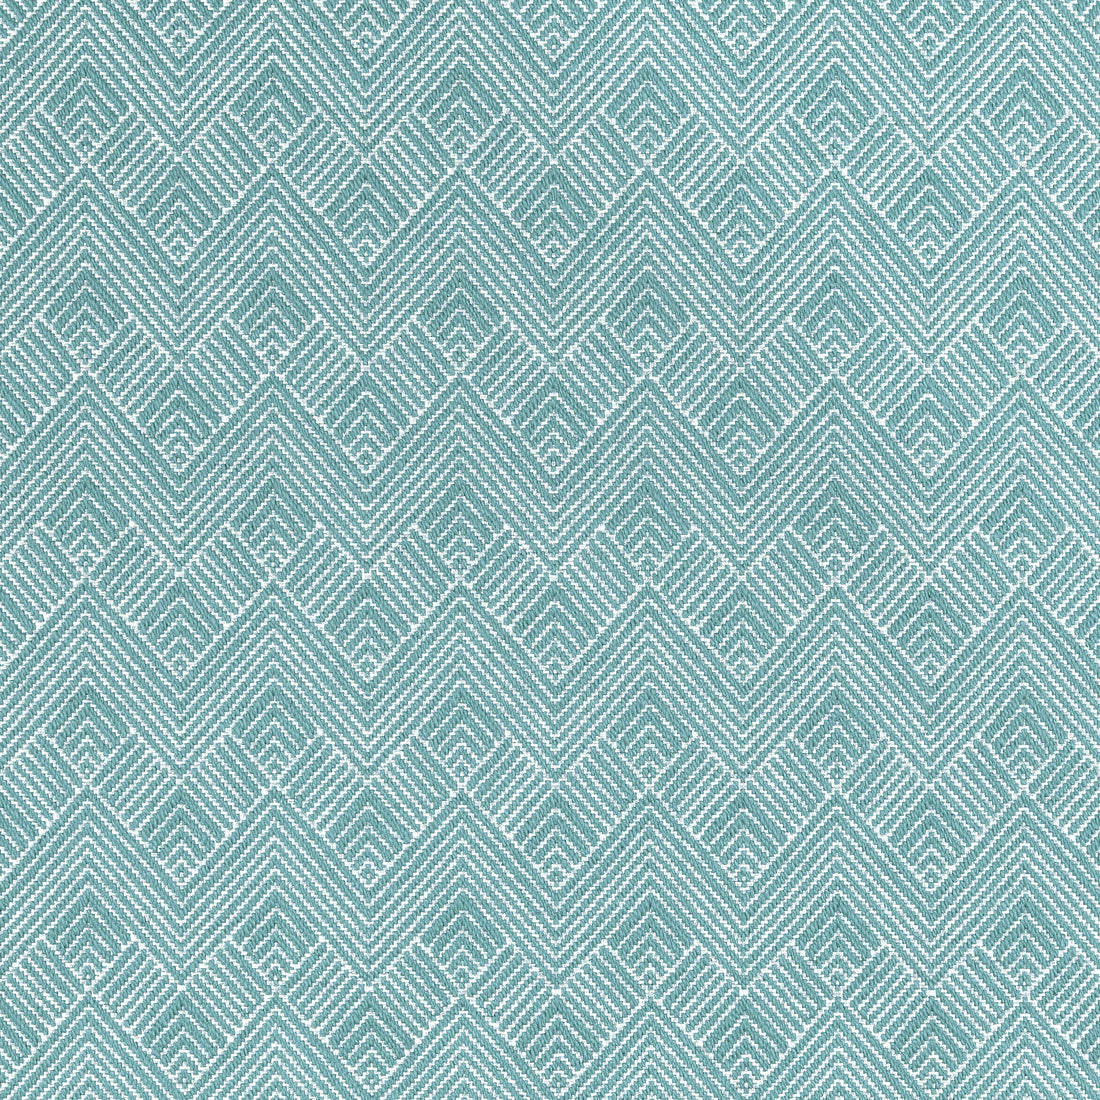 Maddox fabric in aqua color - pattern number W73331 - by Thibaut in the Nomad collection